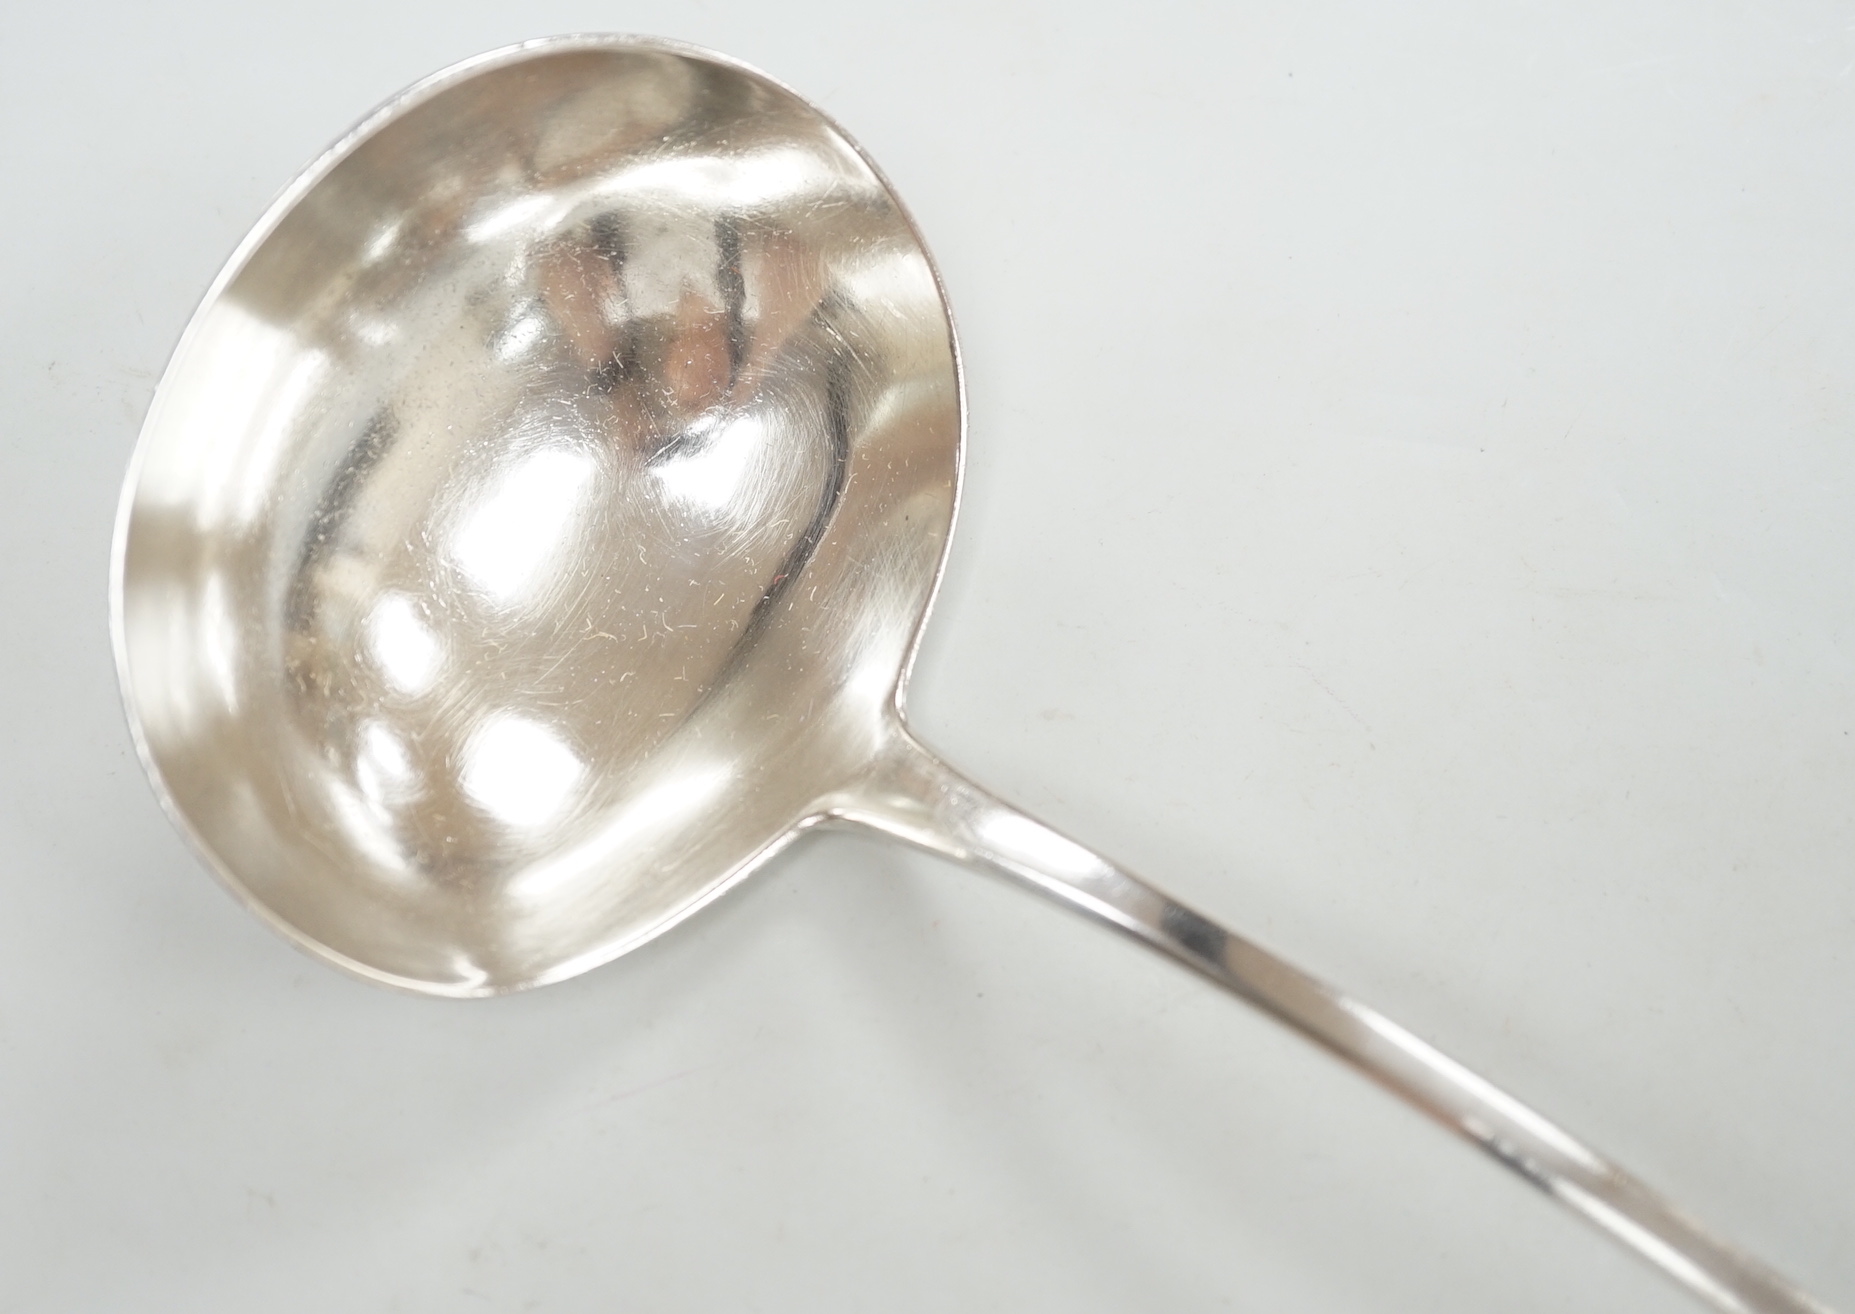 A late George III silver Old English pattern soup ladle, Hougham, Royes & Dix, London,1817, 32.5cm, 6oz.